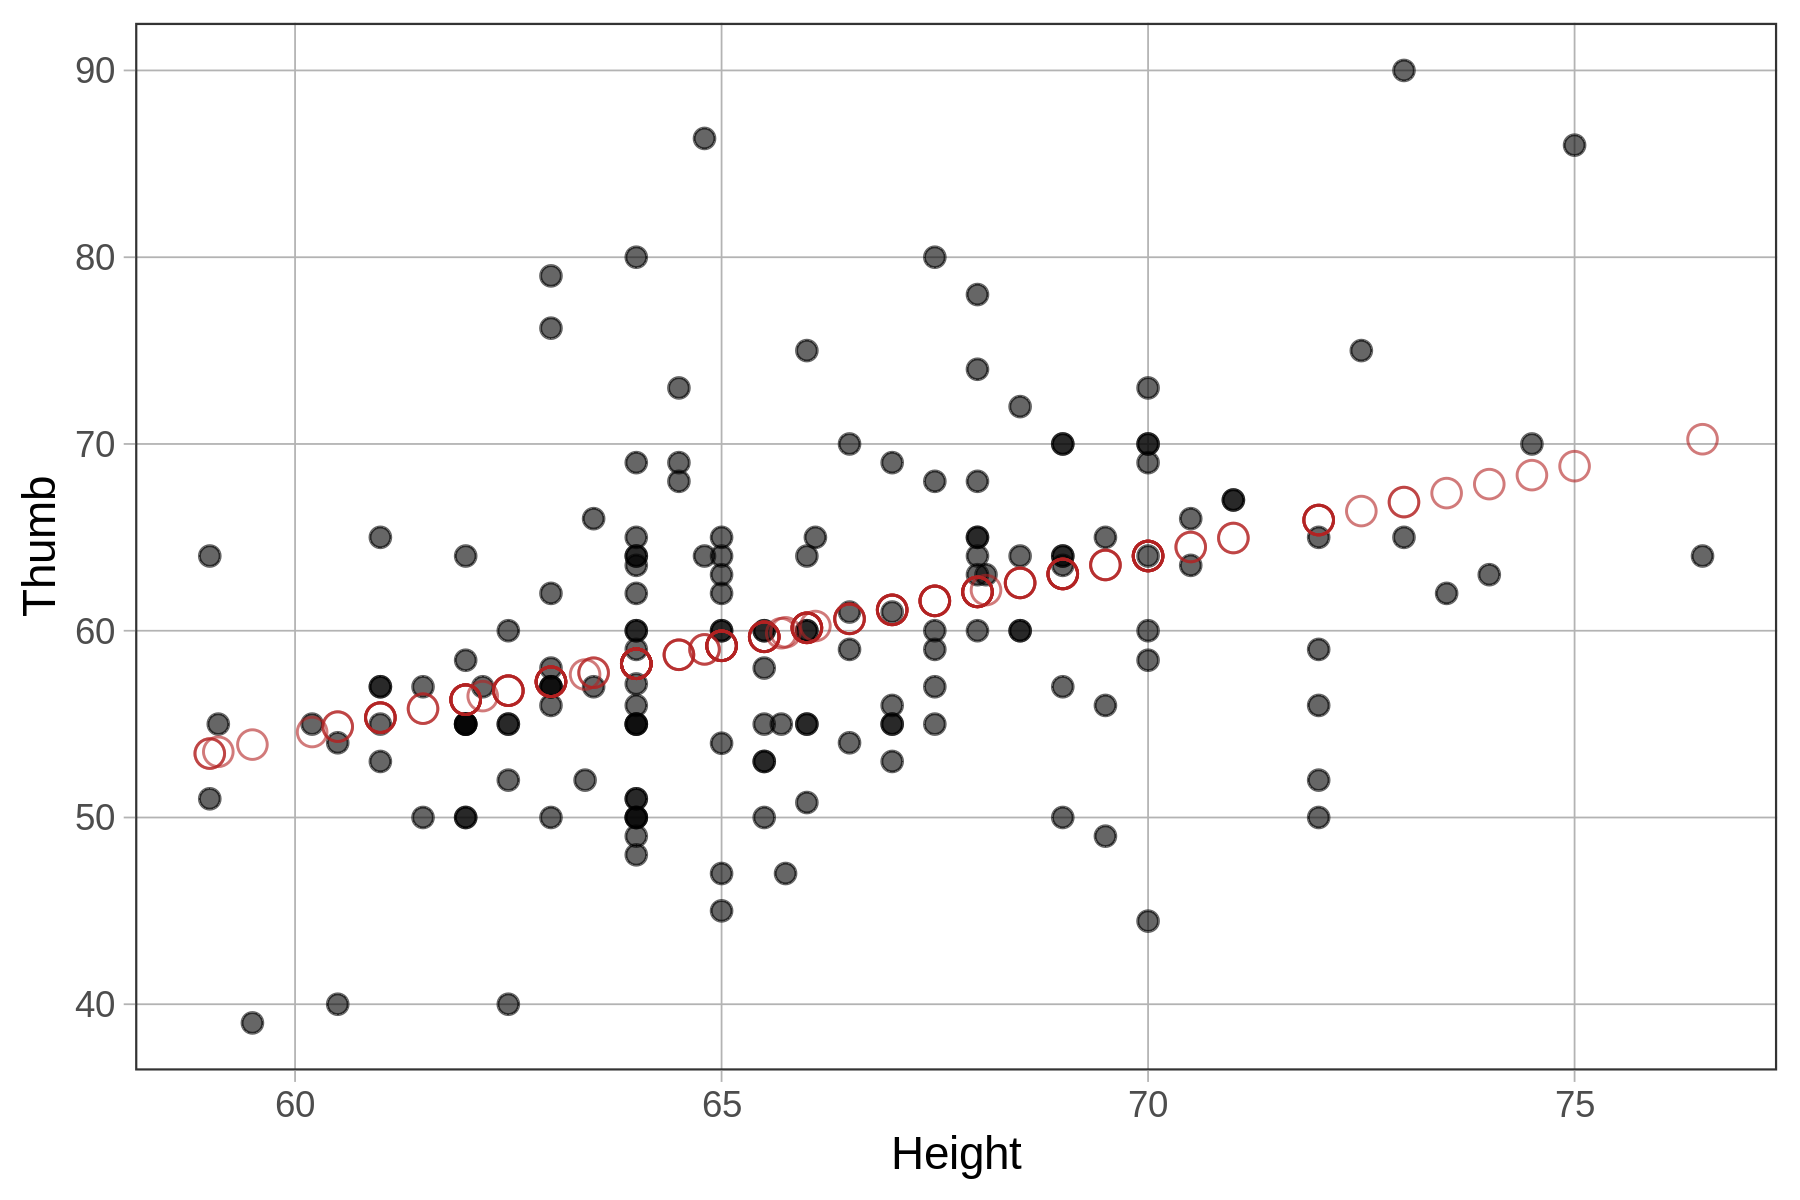 A scatterplot of Thumb by Height. It is overlaid with all of the point predictions from the Height_model in red. The predictions are aligned along the same path as the regression line.